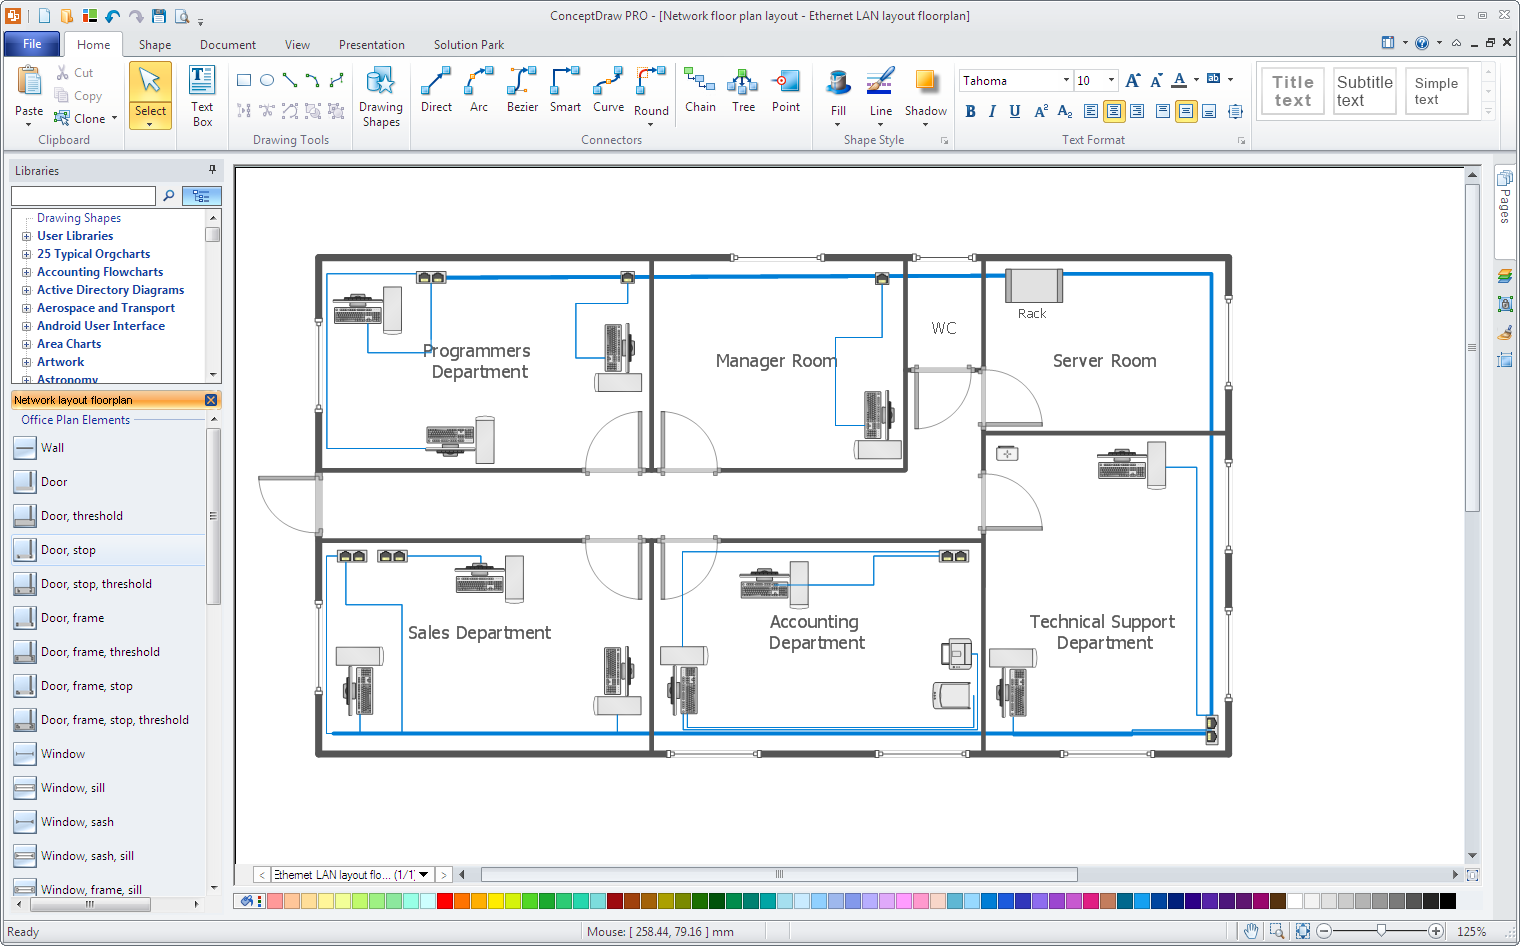 Office Network layout 